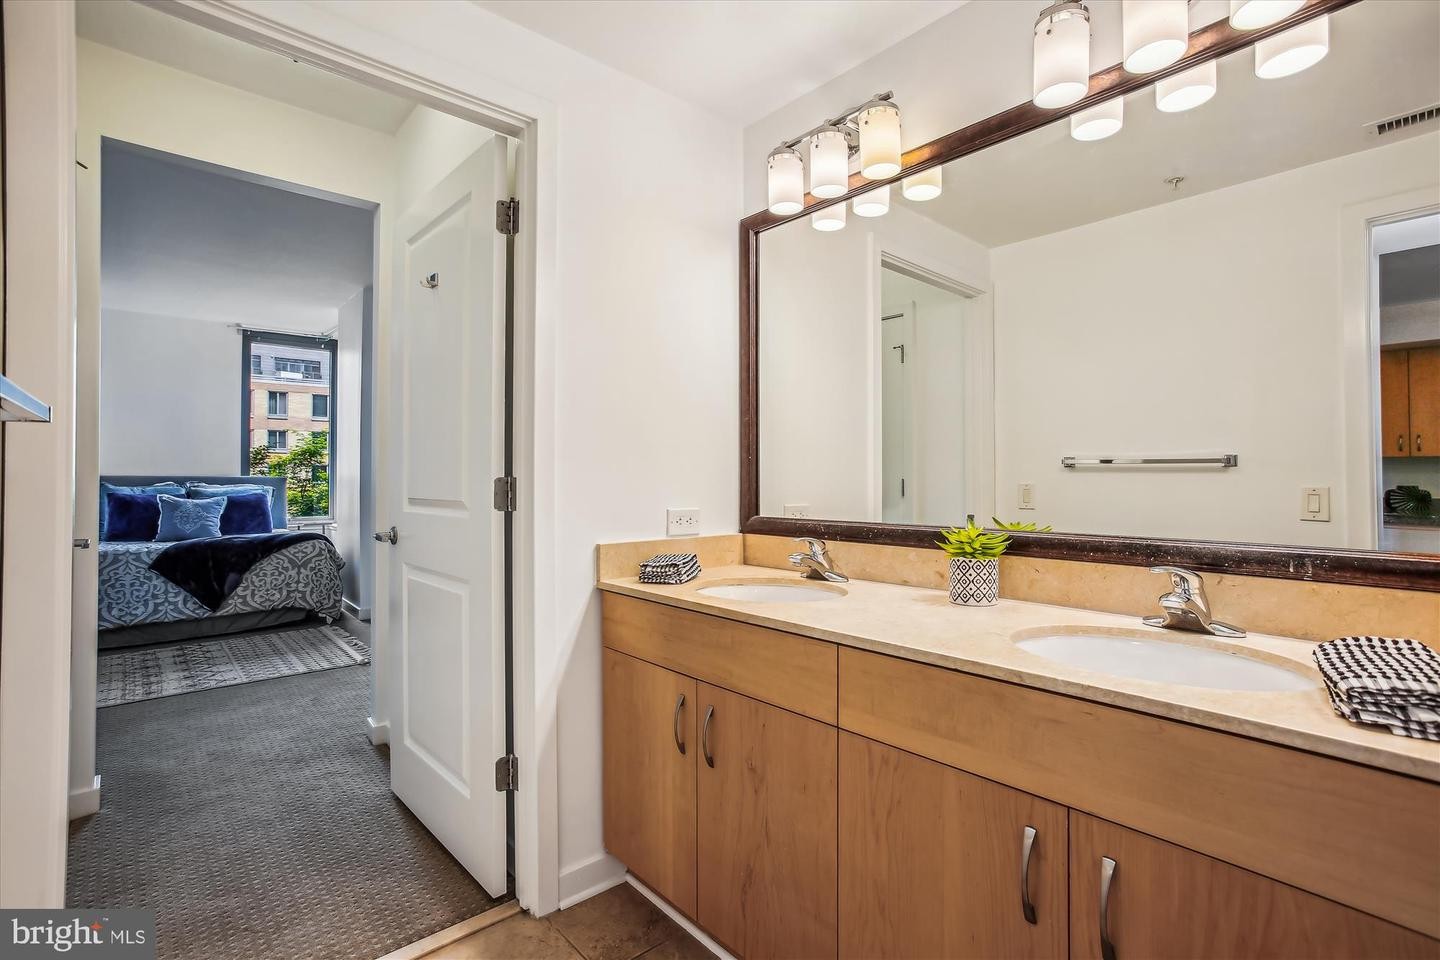 23. 475 K St NW 